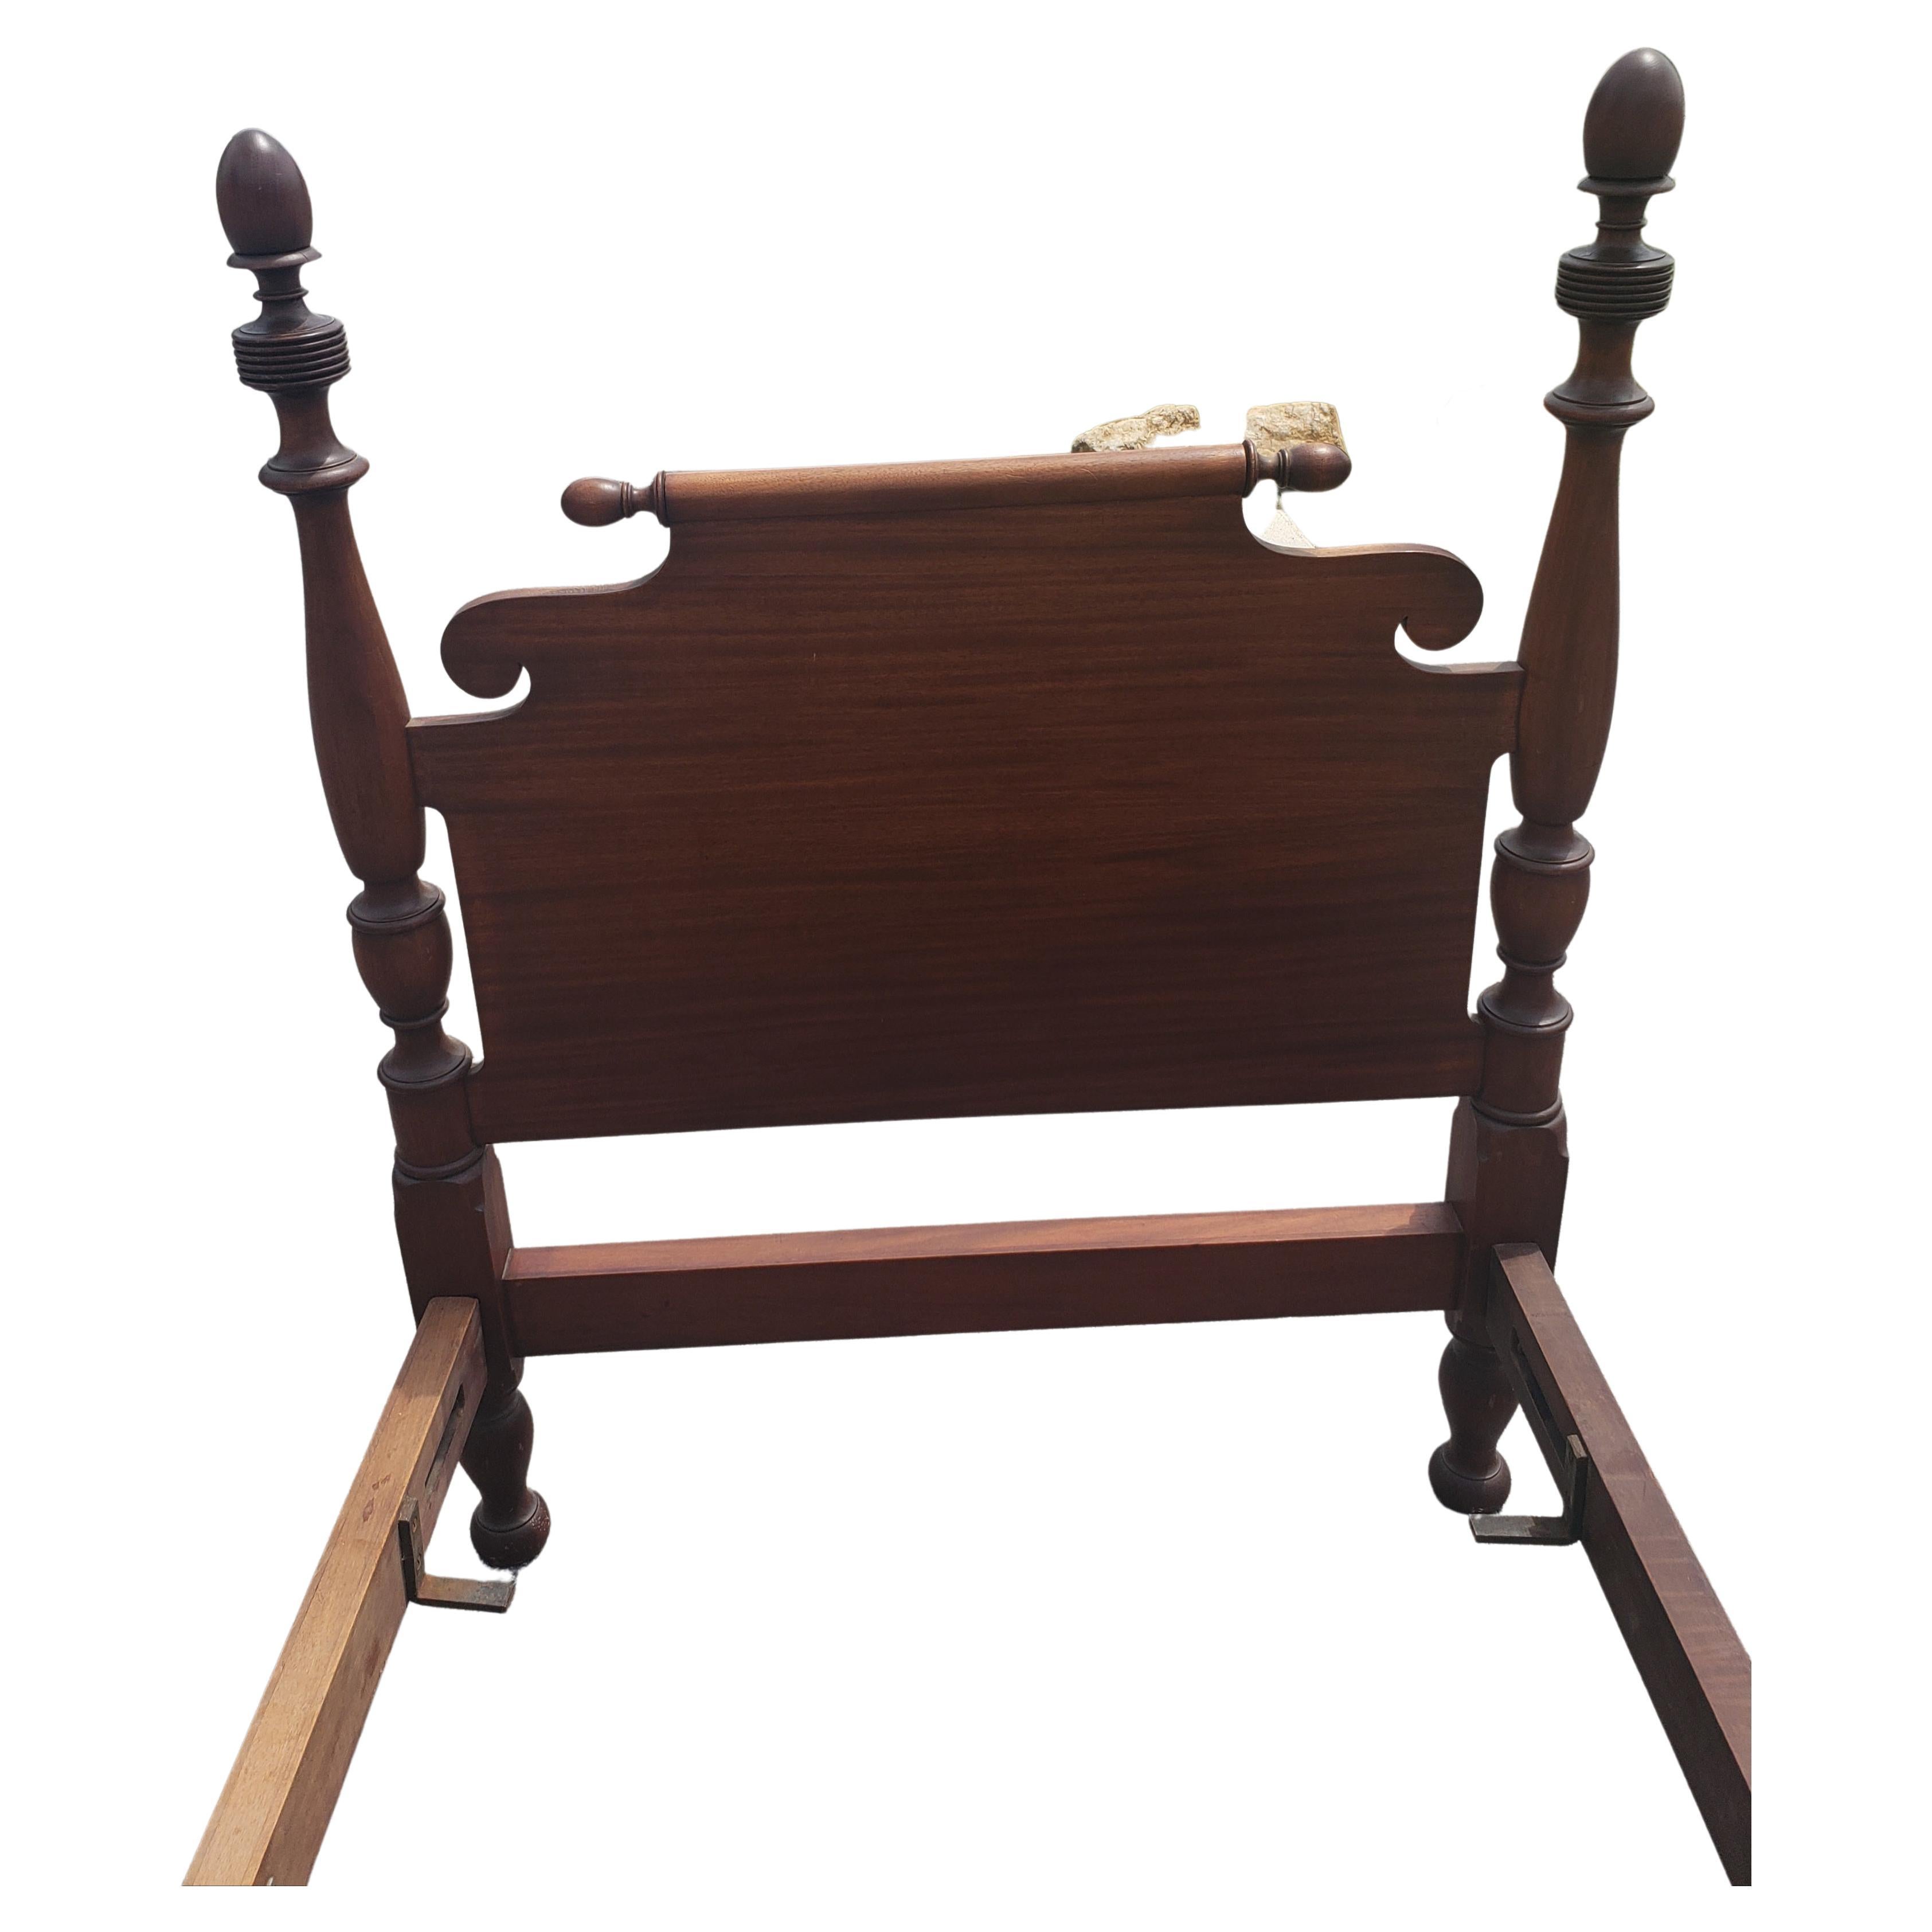 American Colonial Early 20th Century American Empire Mahogany Semi-Post Twin Bedframes, a Pair